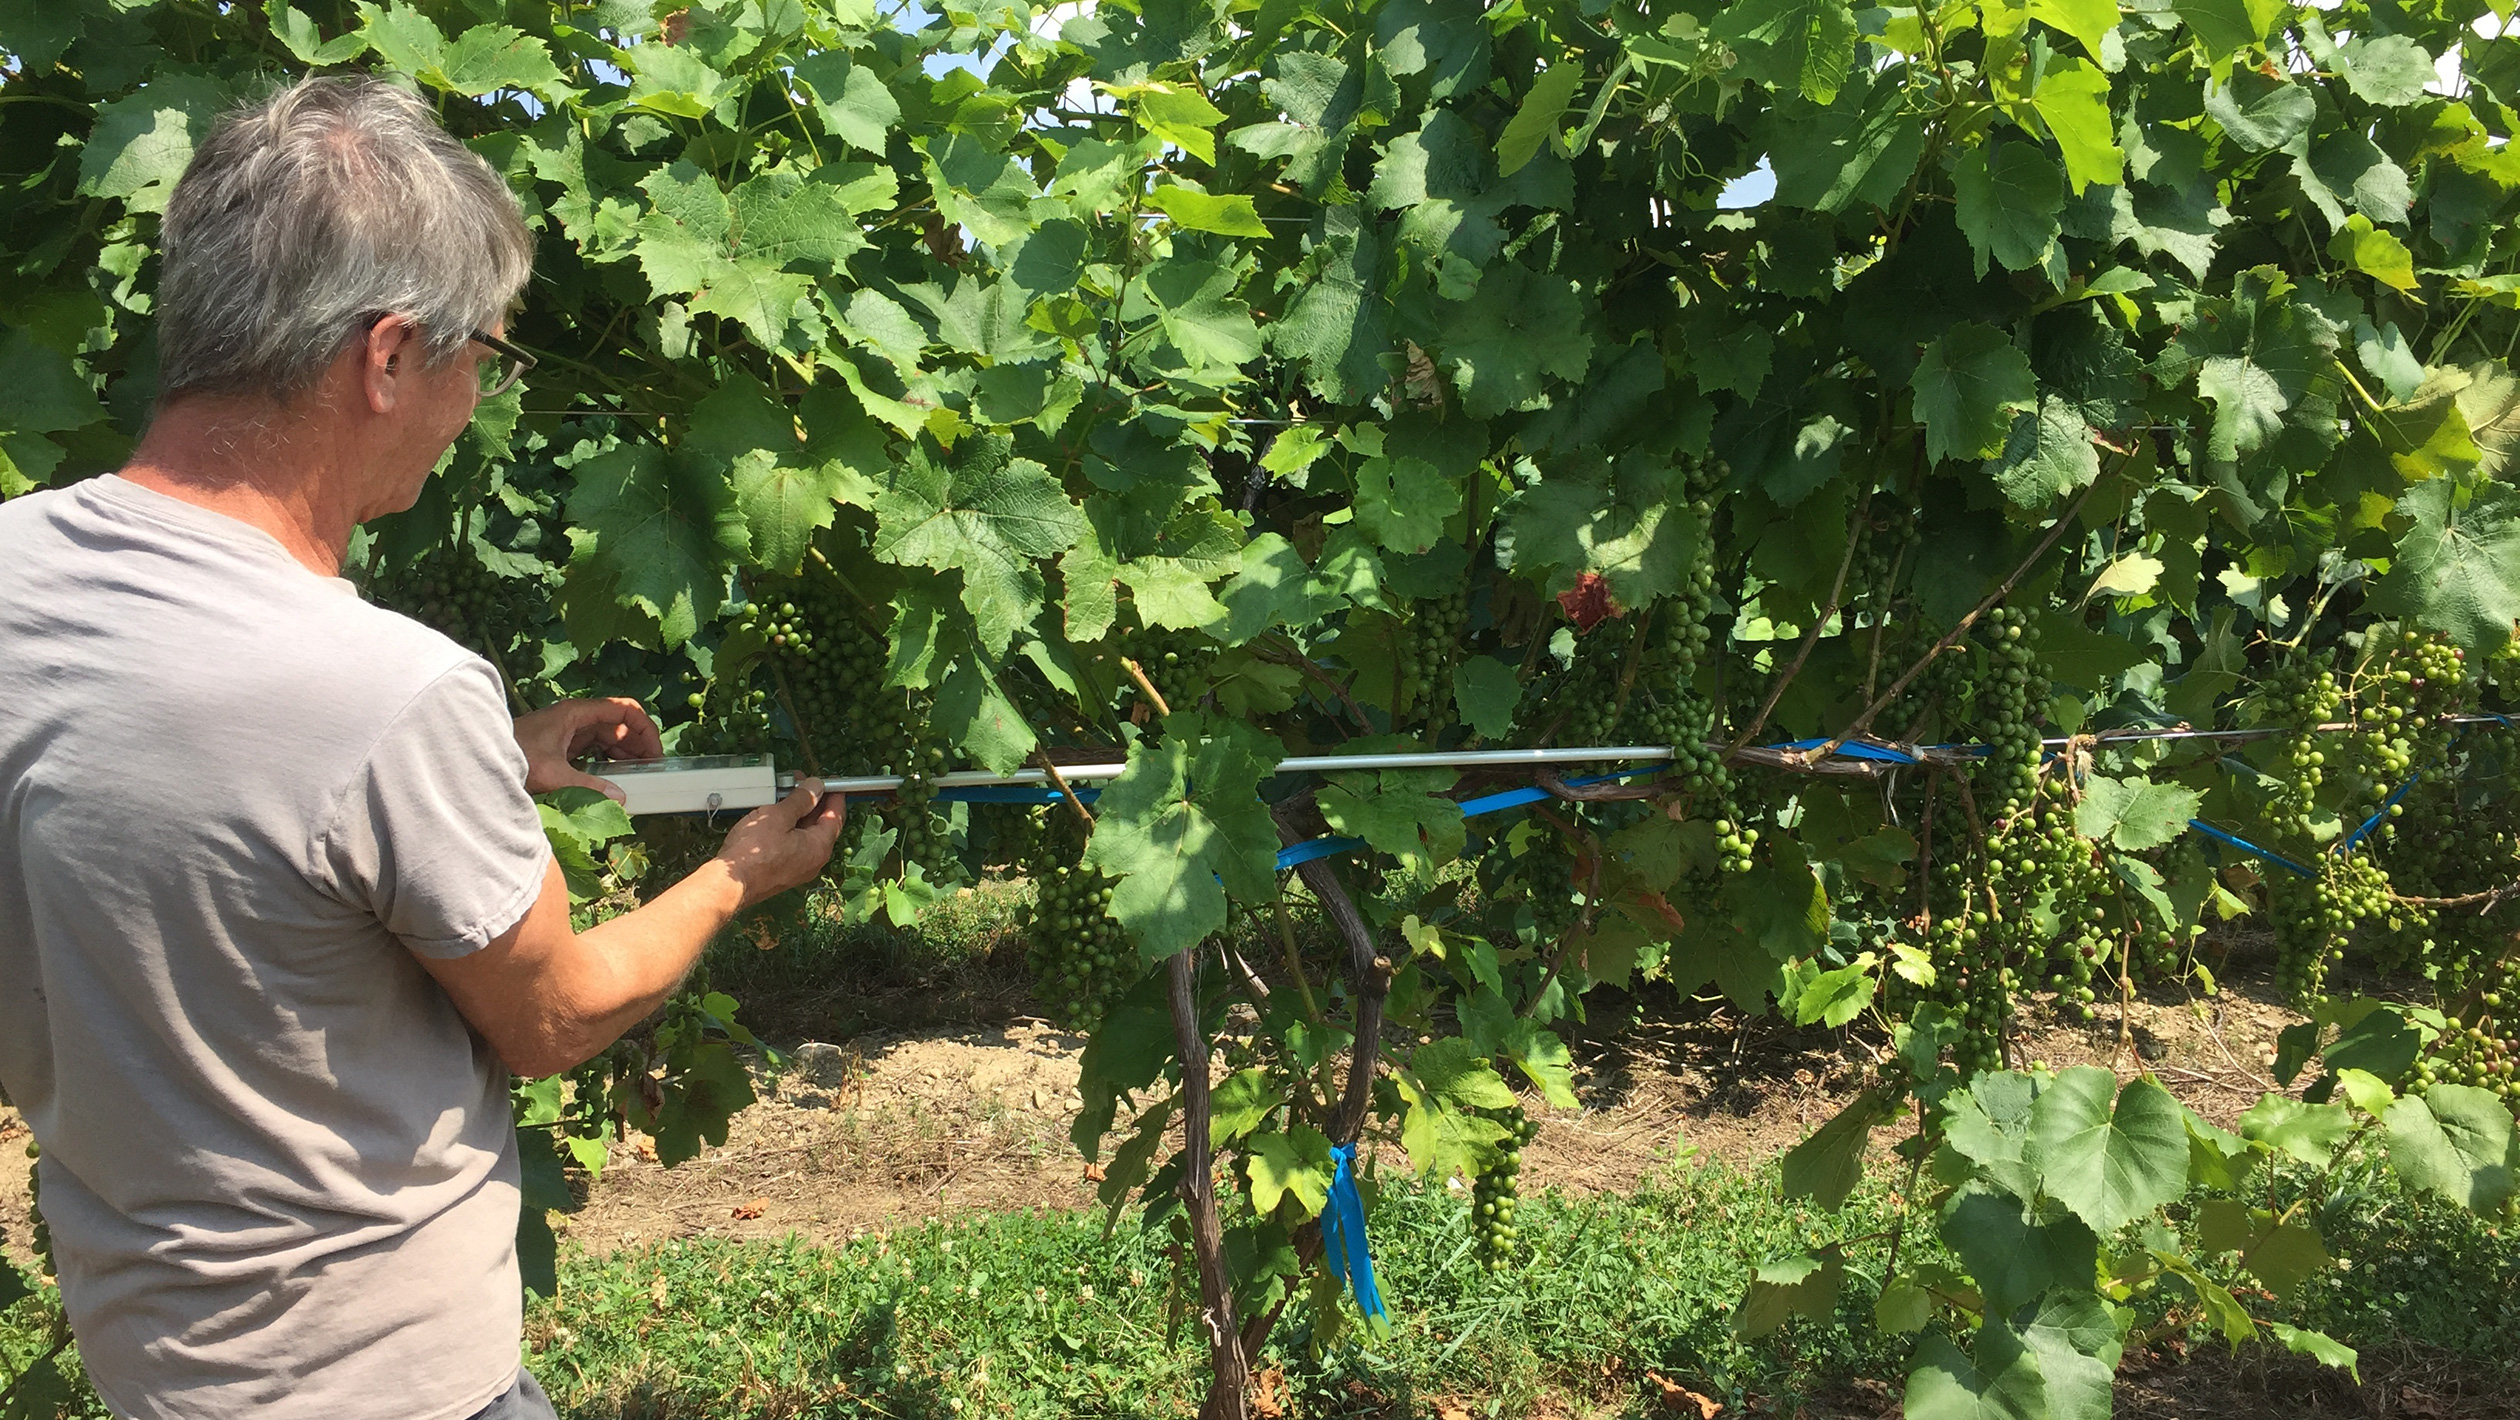 A vineyard worker takes light measurements of Noiret grapes in Pennsylvania